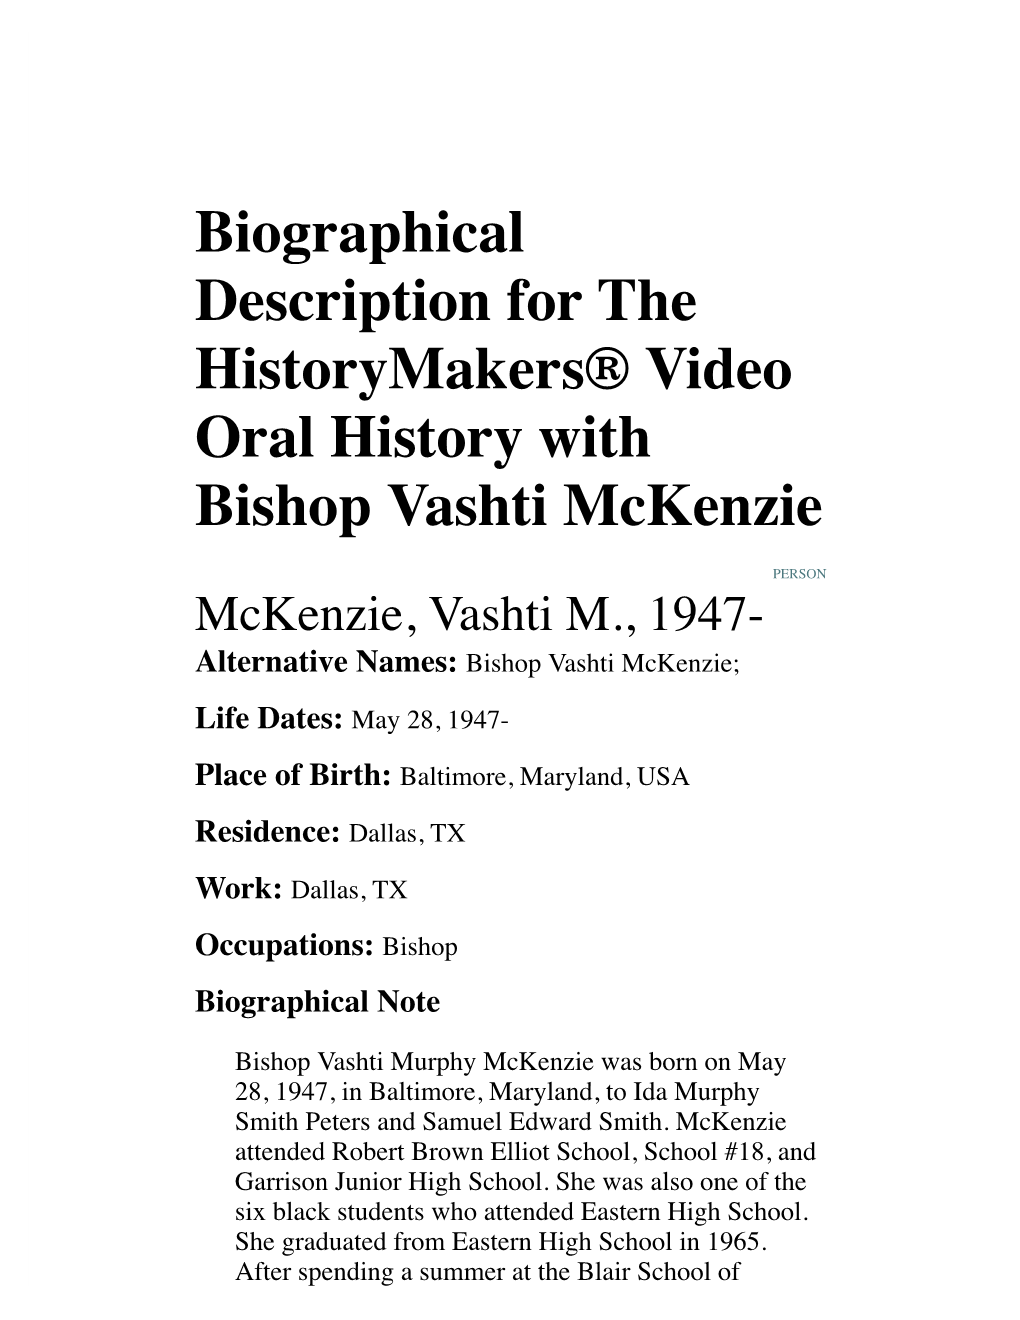 Biographical Description for the Historymakers® Video Oral History with Bishop Vashti Mckenzie